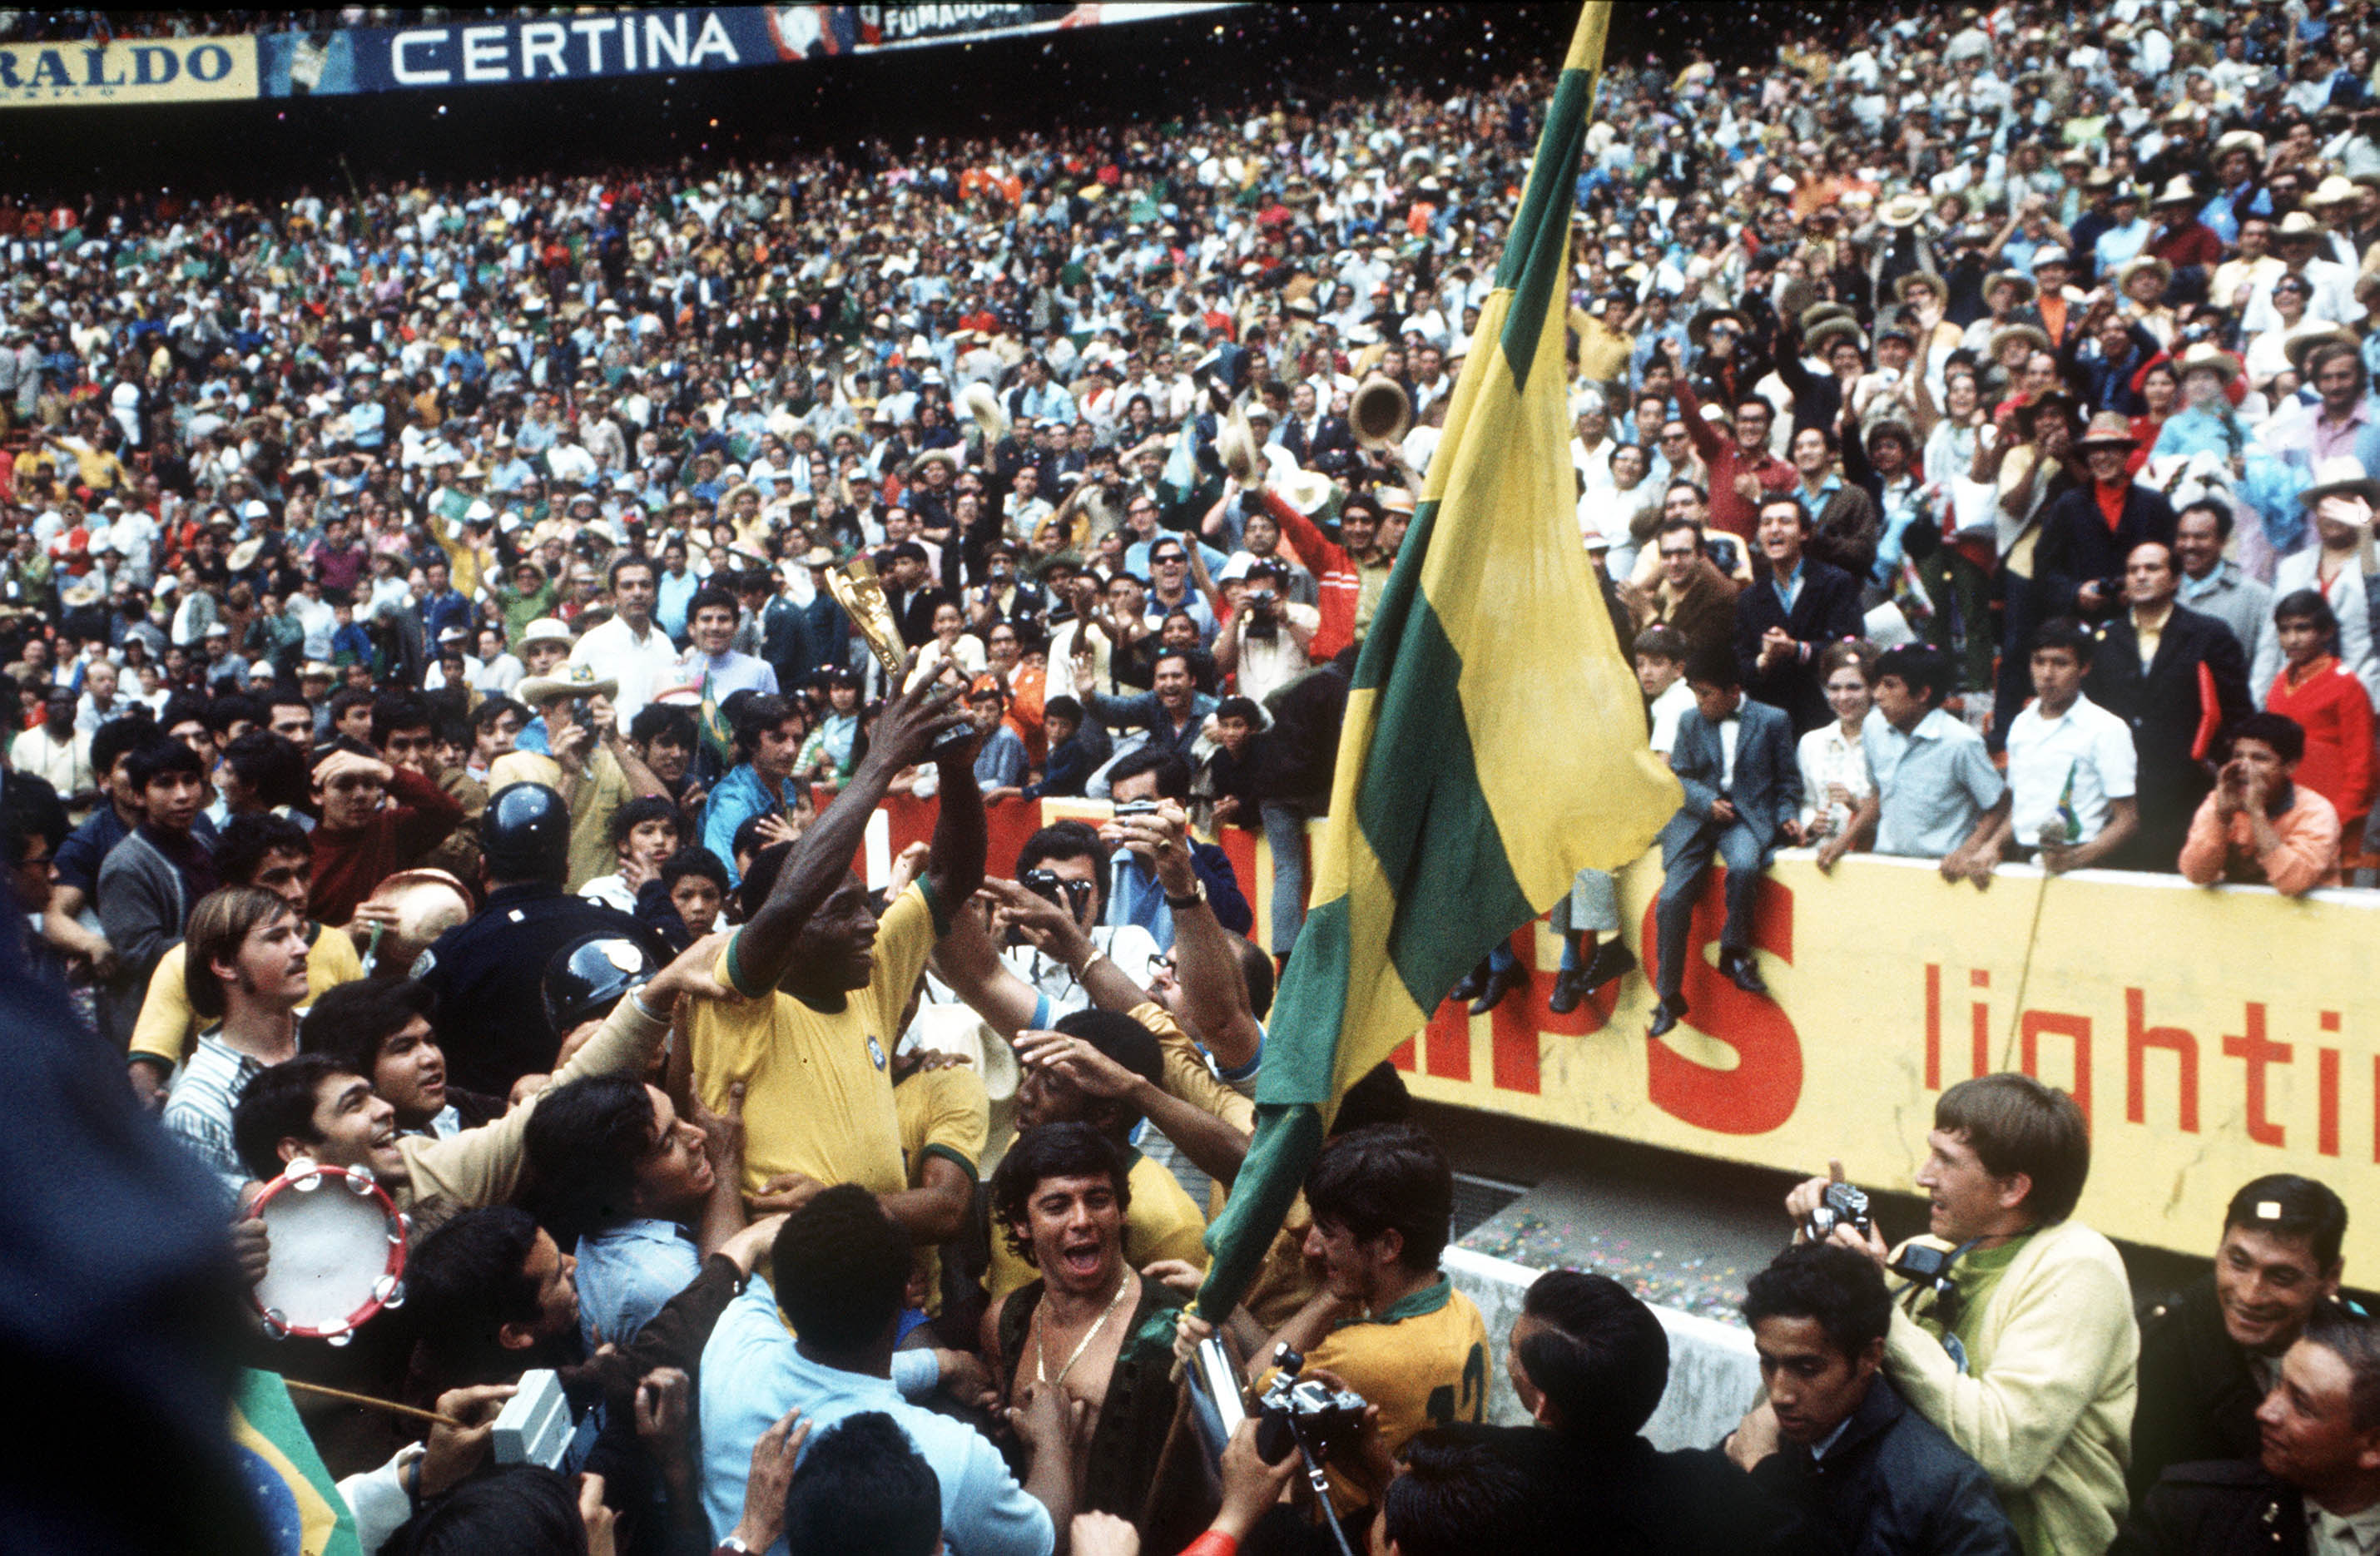 Pele holds aloft the World Cup trophy – his and Brazil’s third – in 1970